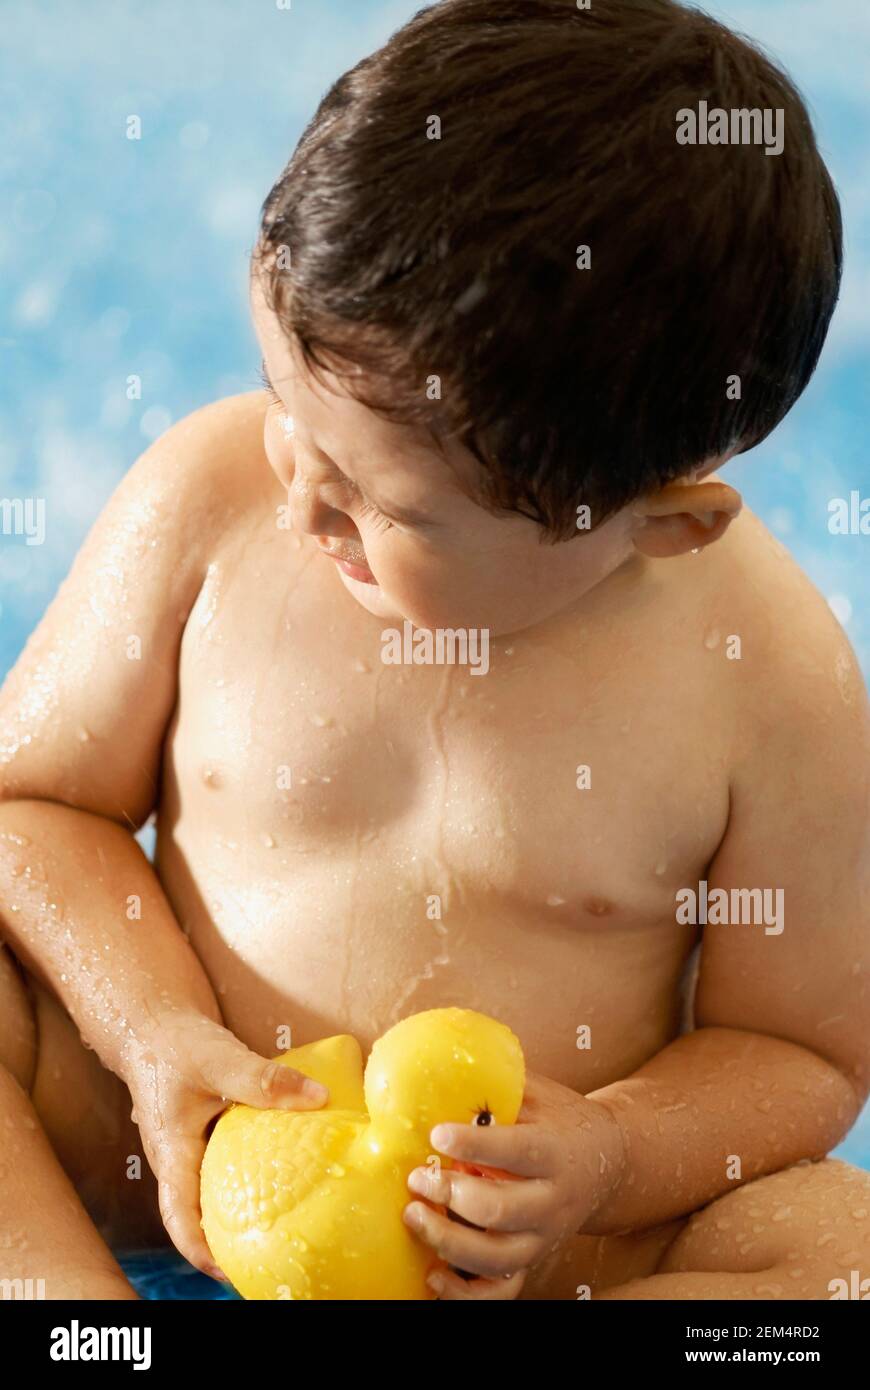 Close-up of a baby boy playing with a rubber duck in a swimming pool Stock Photo